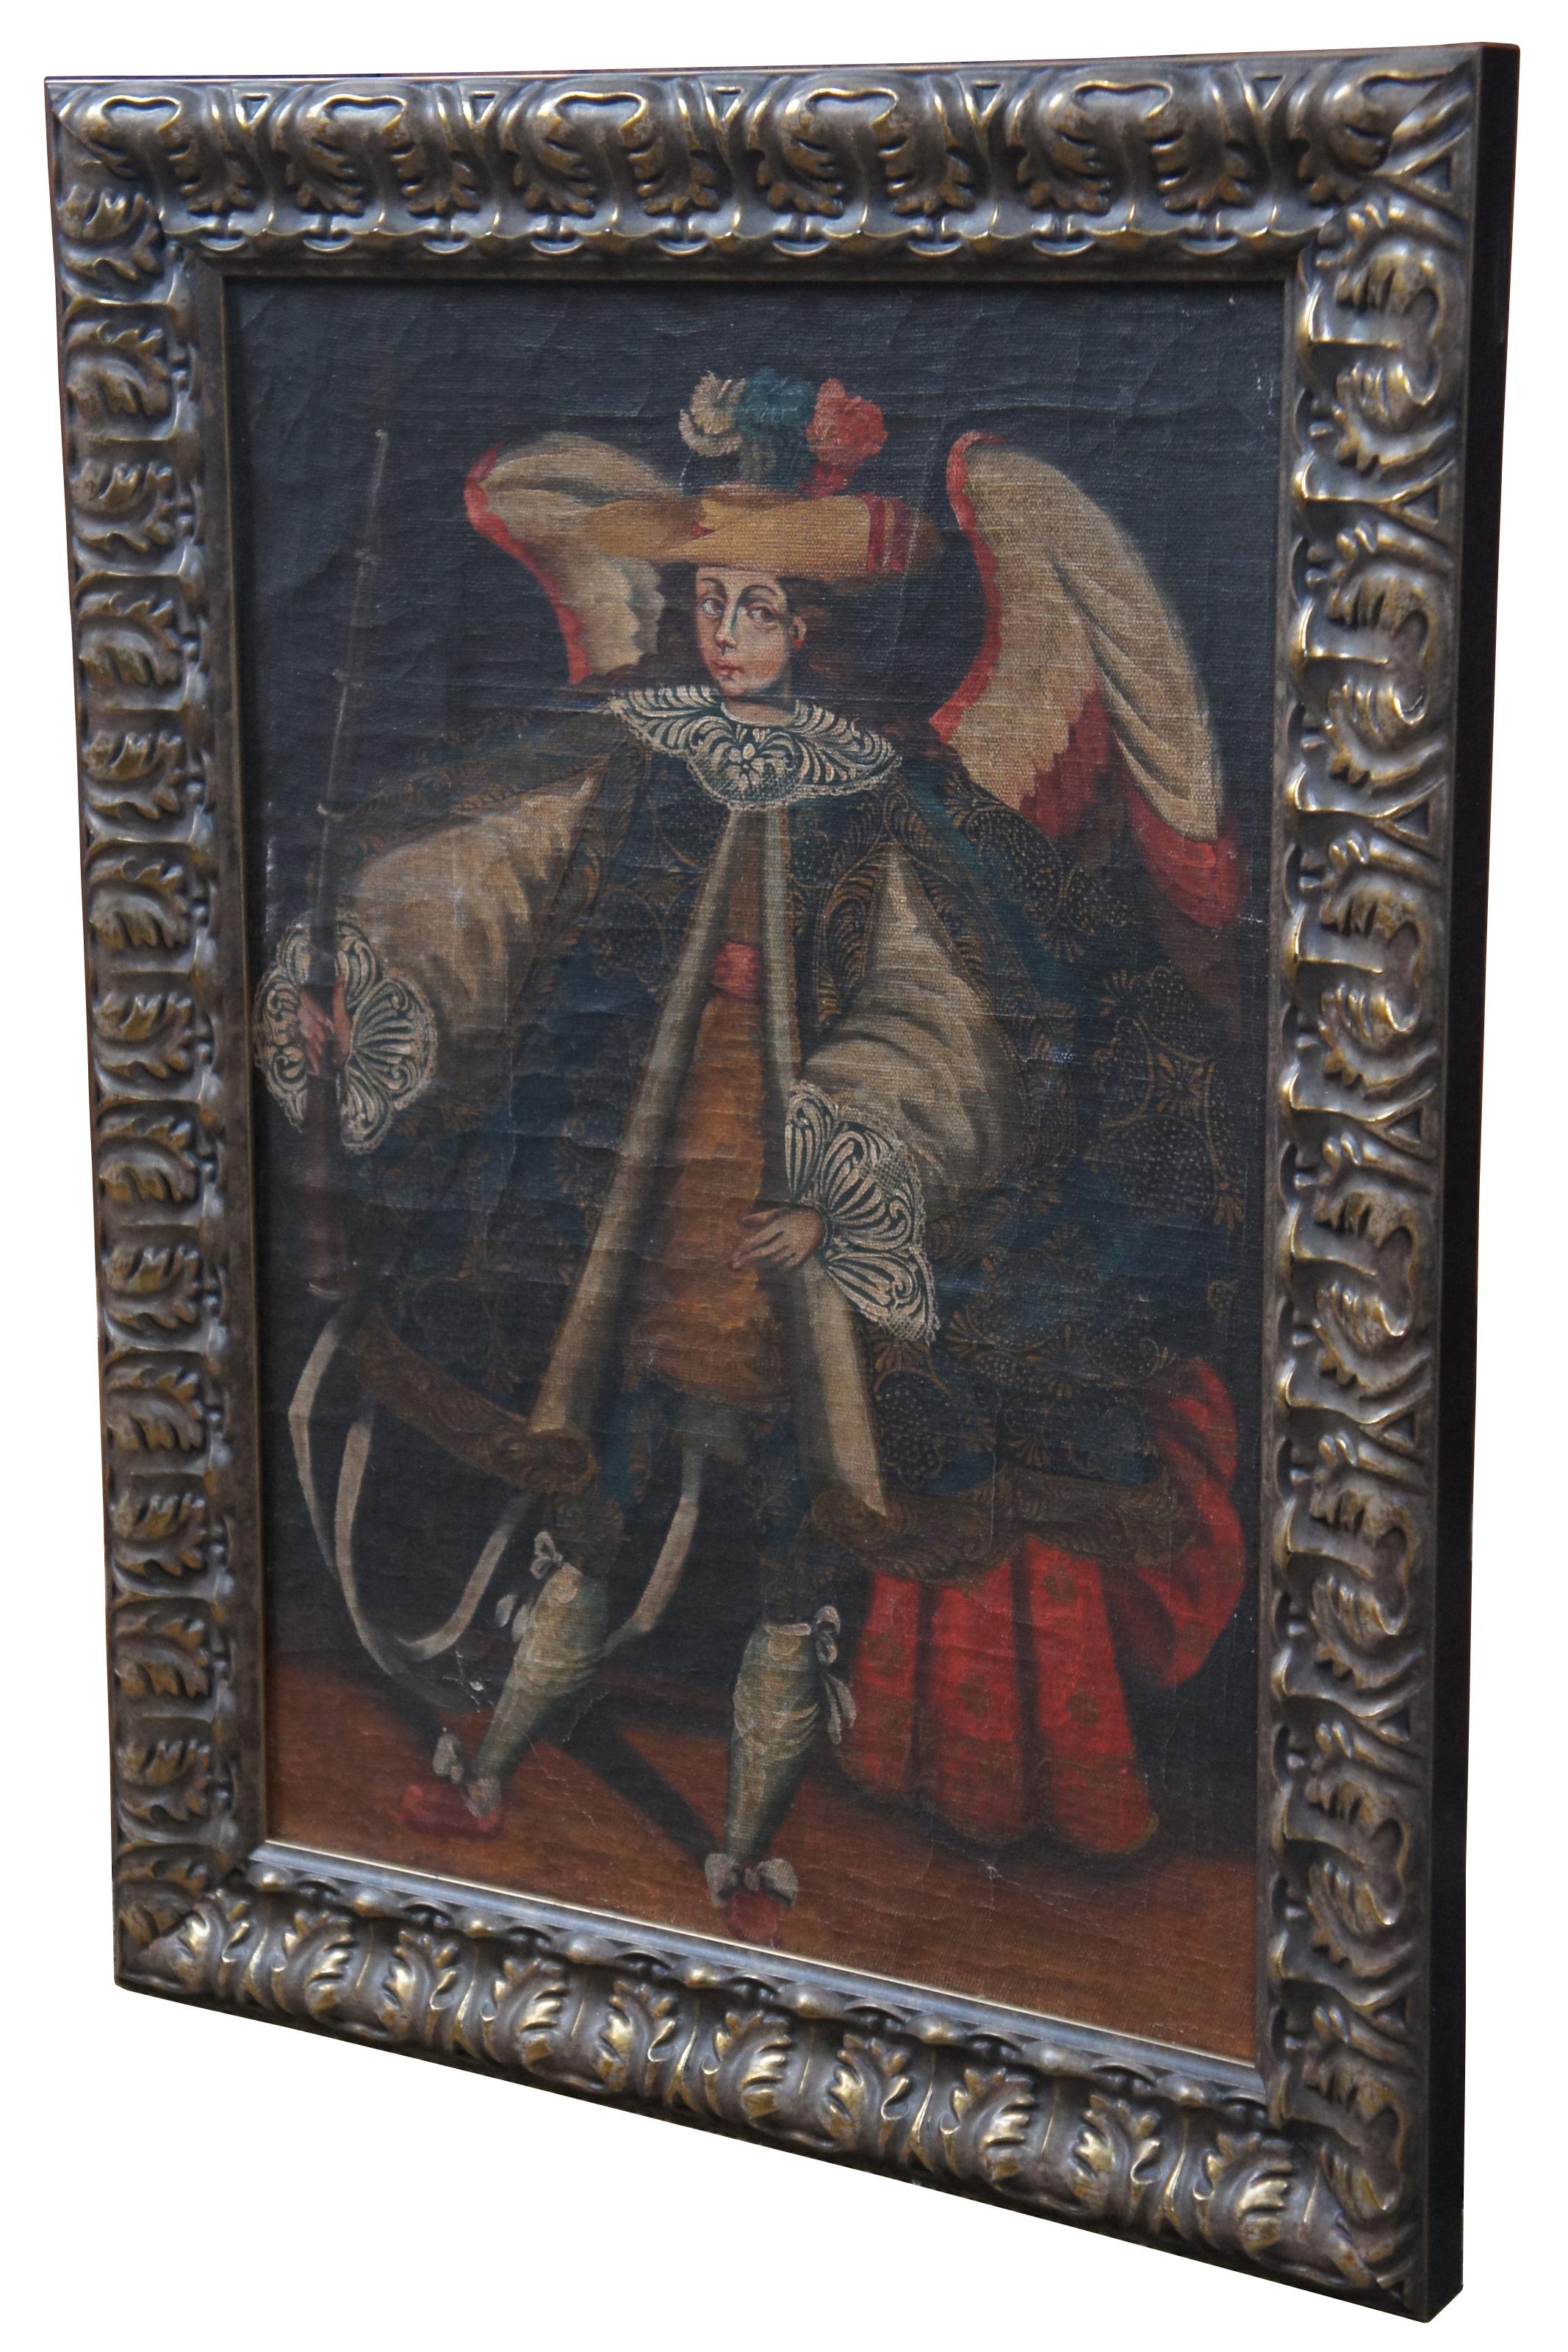 Antique Spanish Colonial or Peruvian portrait oil painting of Angel Arcabucero on canvas.

Ángel arcabucero is an angel depicted with an arquebus instead of the sword traditional for martial angels, dressed in clothing inspired by that of the